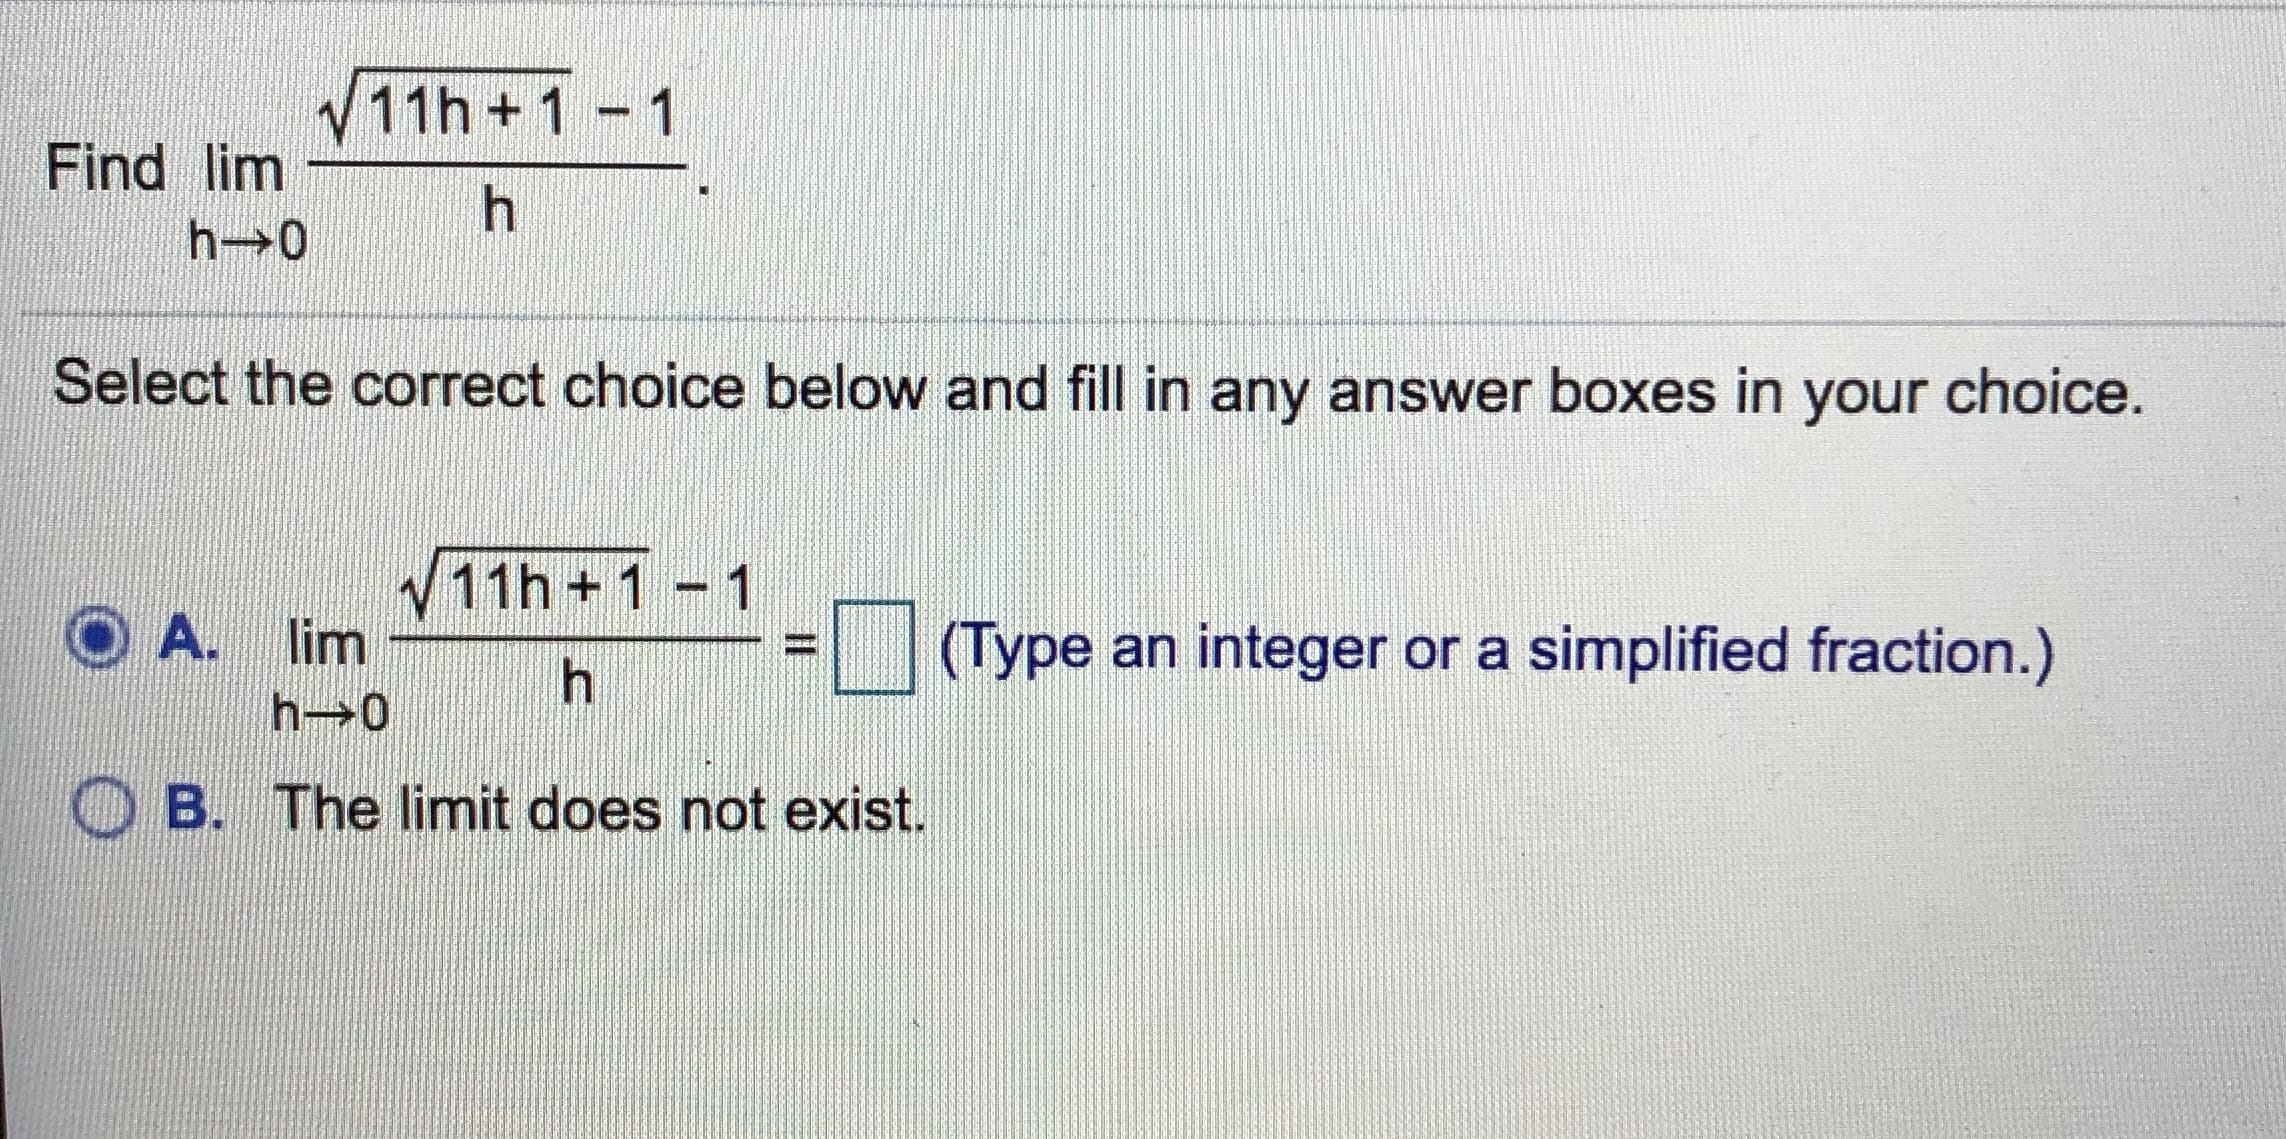 、/ 11 h + 1-1
Find lim
Select the correct choice below and fill in any answer boxes in your choice
v11h +1 -1
A.
lim
ーーーーーーーーーーー
「
1(Type an integer or a simplified fraction)
ー
h→0
B. The limit does not exist
